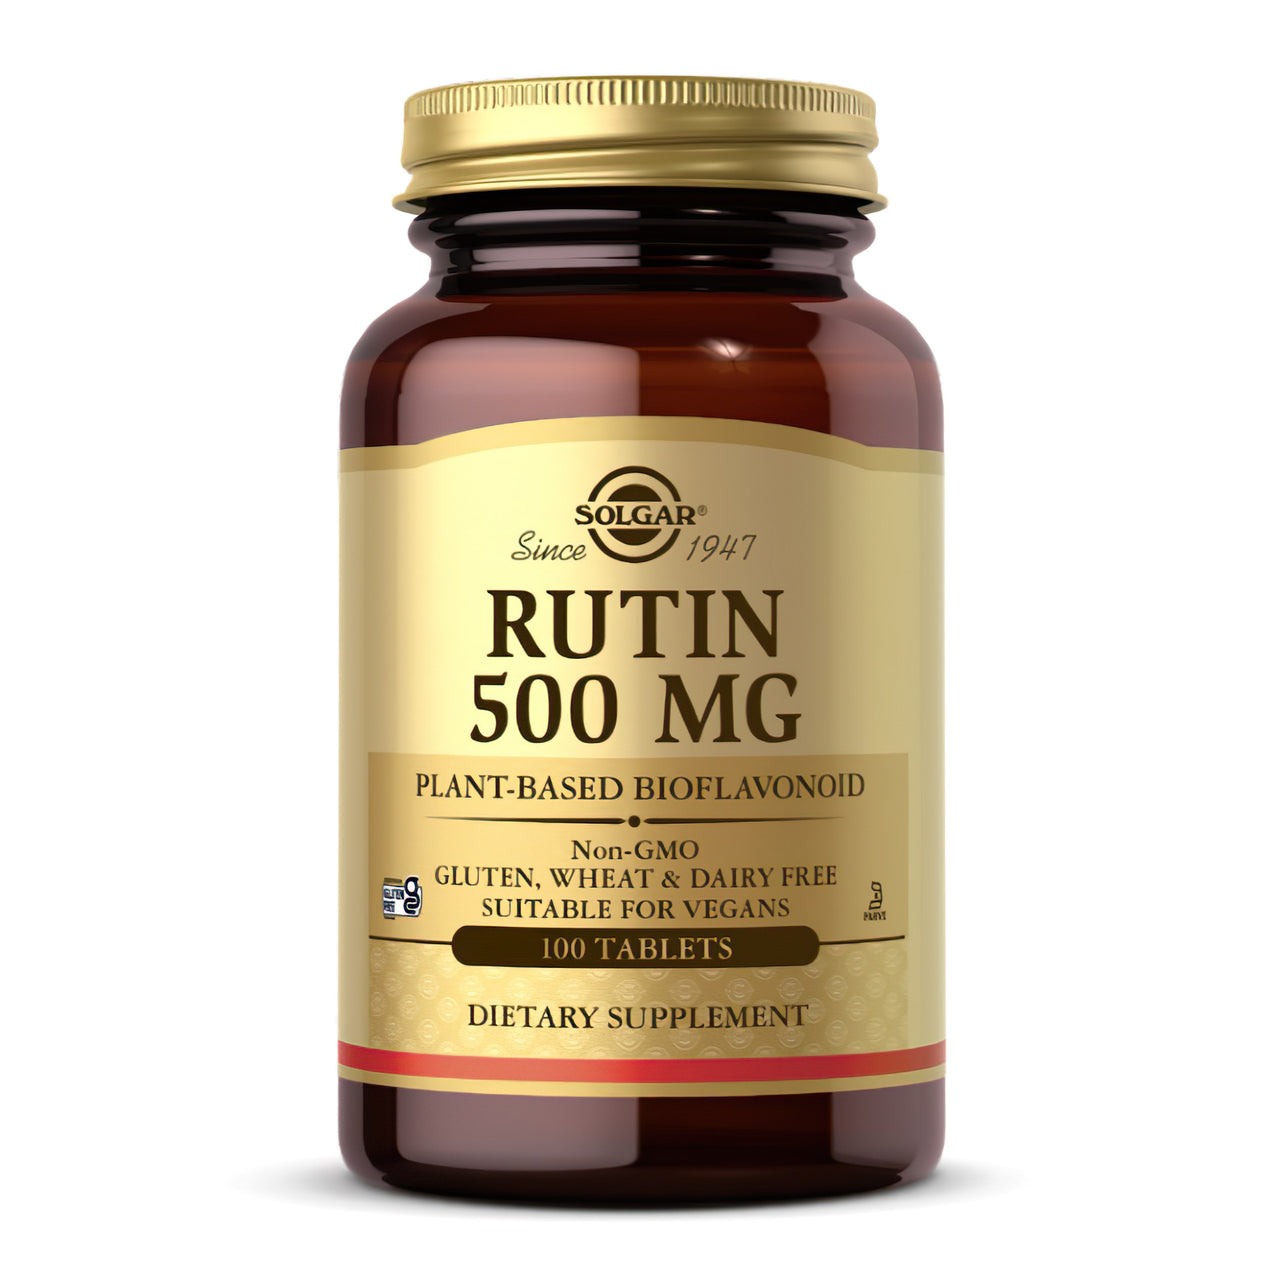 A bottle of Solgar's Rutin 500 mg 100 Tablets supplement, providing 500 mg per serving to support healthy blood vessels.